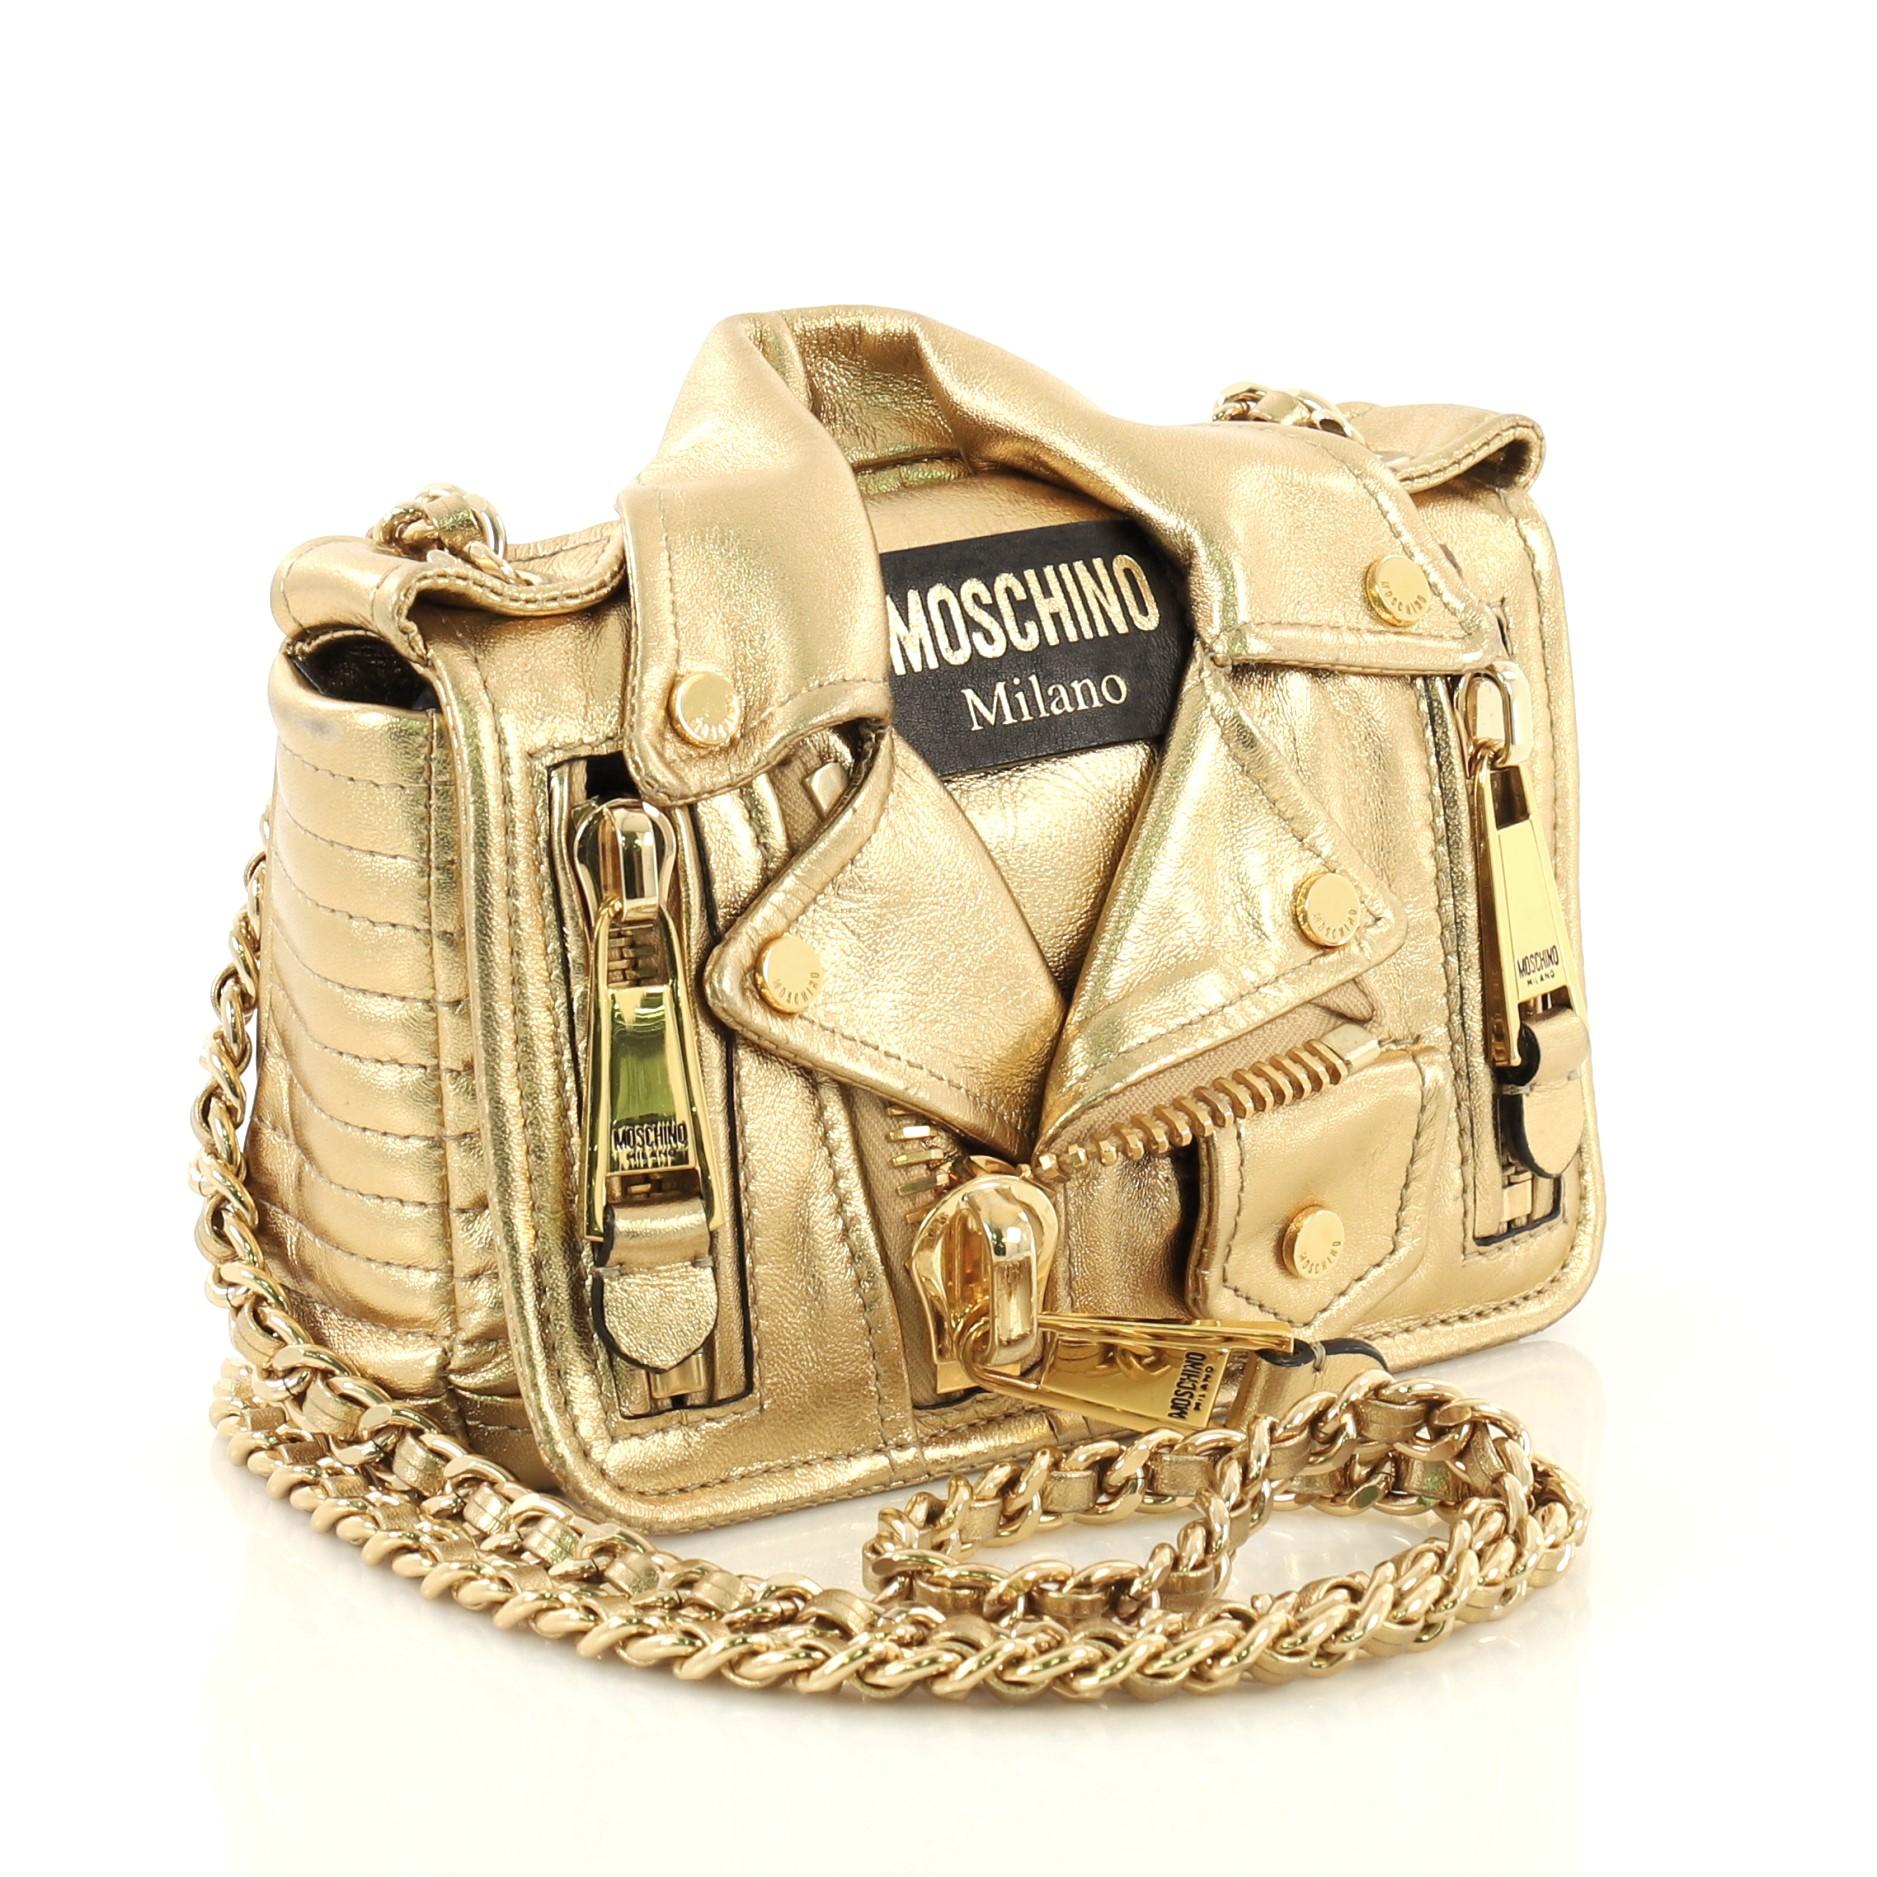 This Moschino Biker Bag Leather Small, crafted from gold leather, features woven-in leather chain strap, exterior zip pockets, and gold-tone hardware. It opens to a black fabric interior with slip pocket. 

Estimated Retail Price: $1,995
Condition: